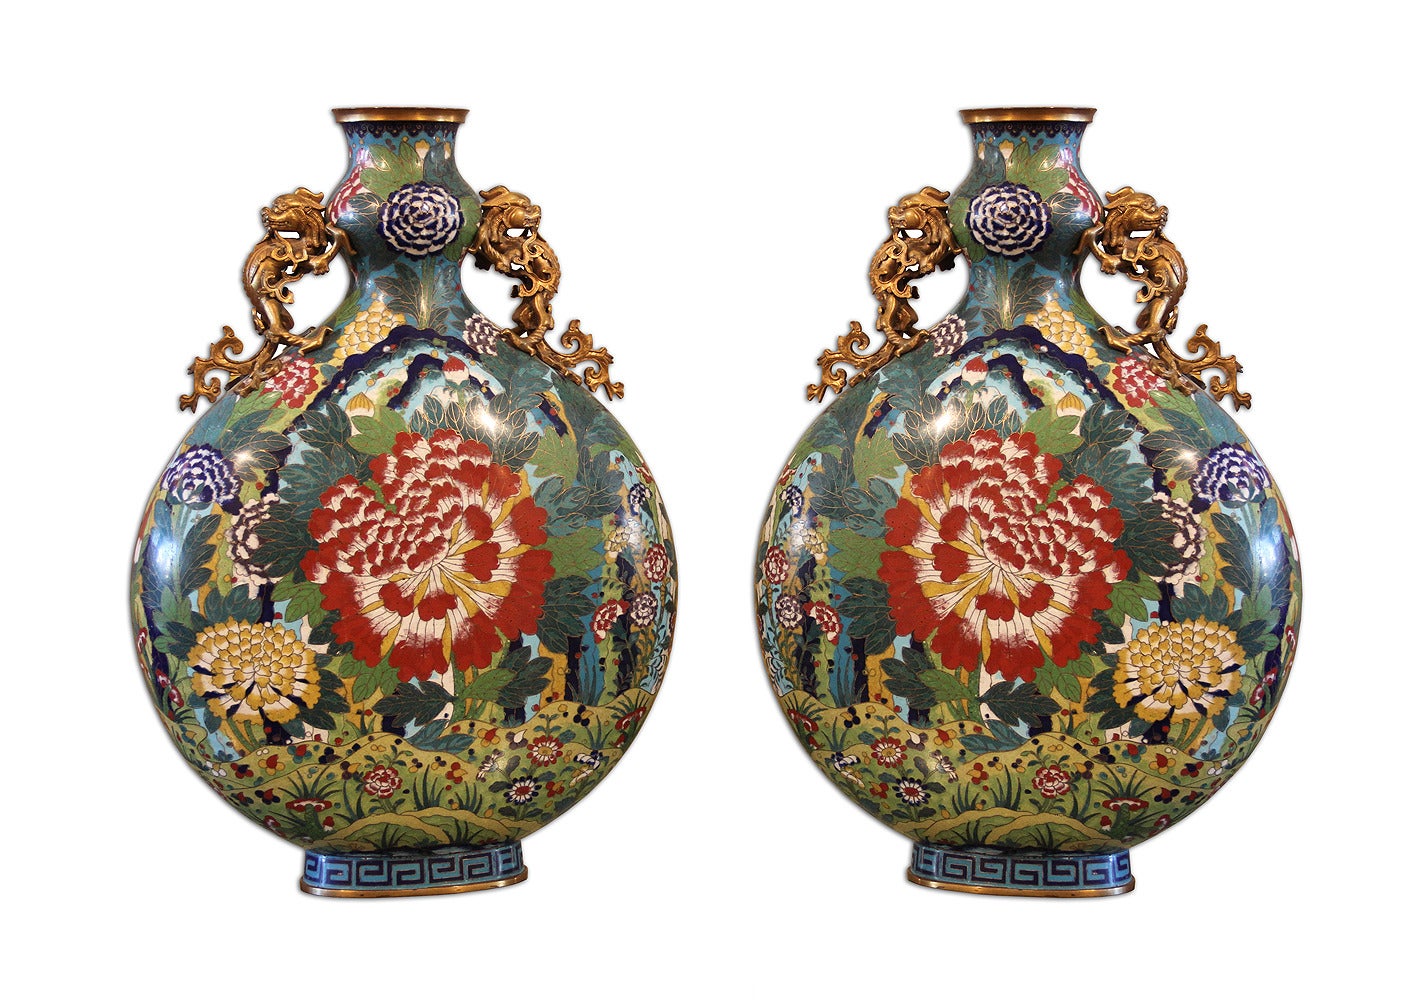 Spectacular Pair of 18thC. Chinese Cloisonné Moon Flasks